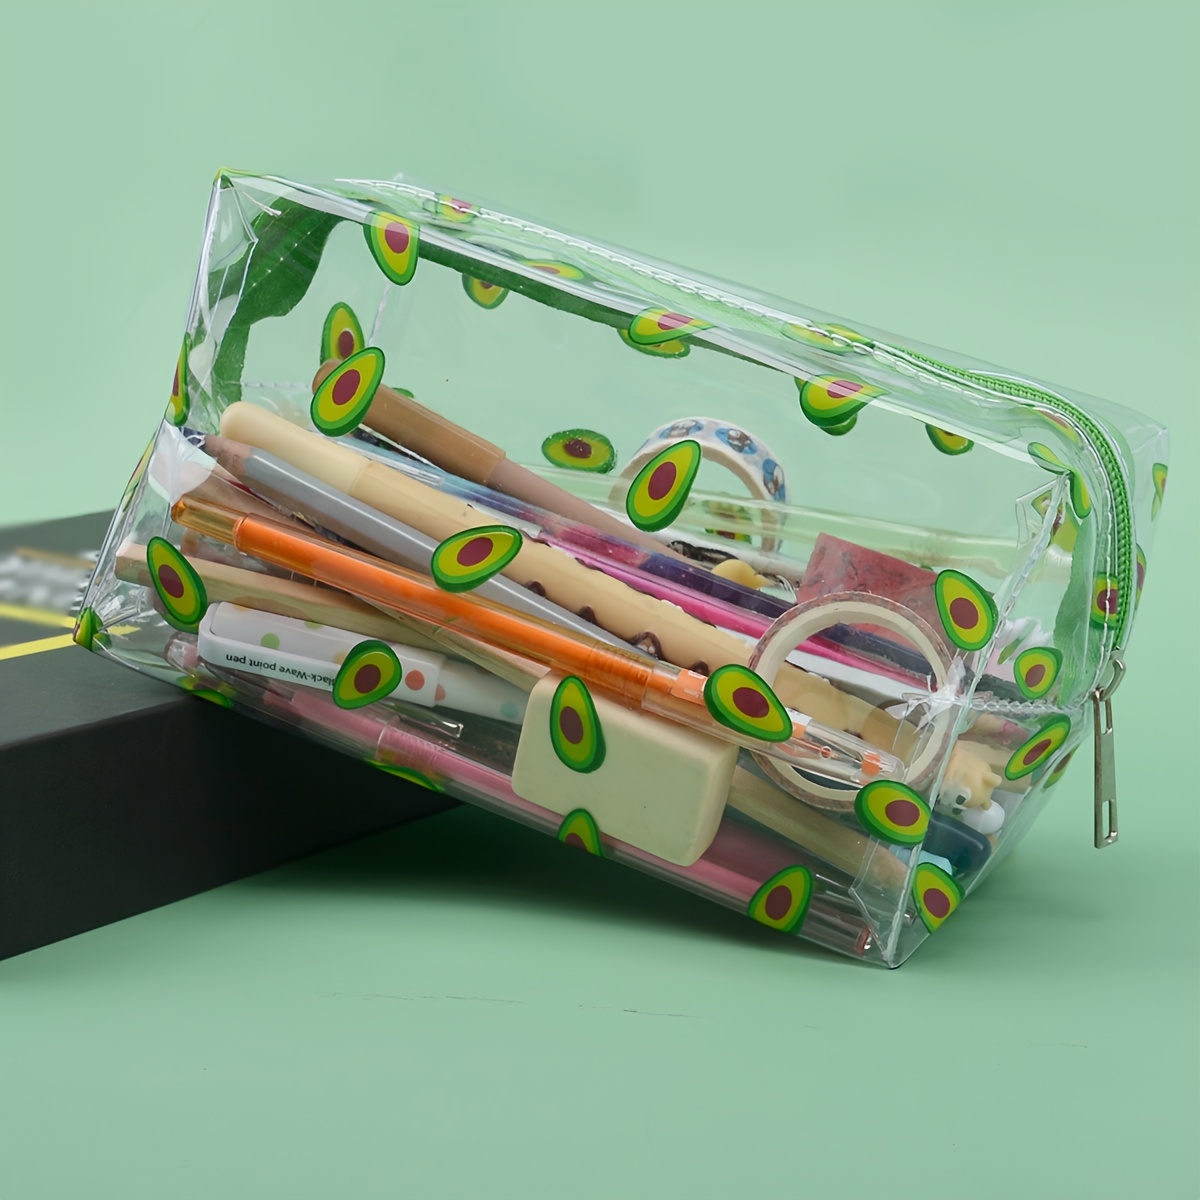 Organize Your Writing Supplies with this Large Capacity Avocado Pencil Case!